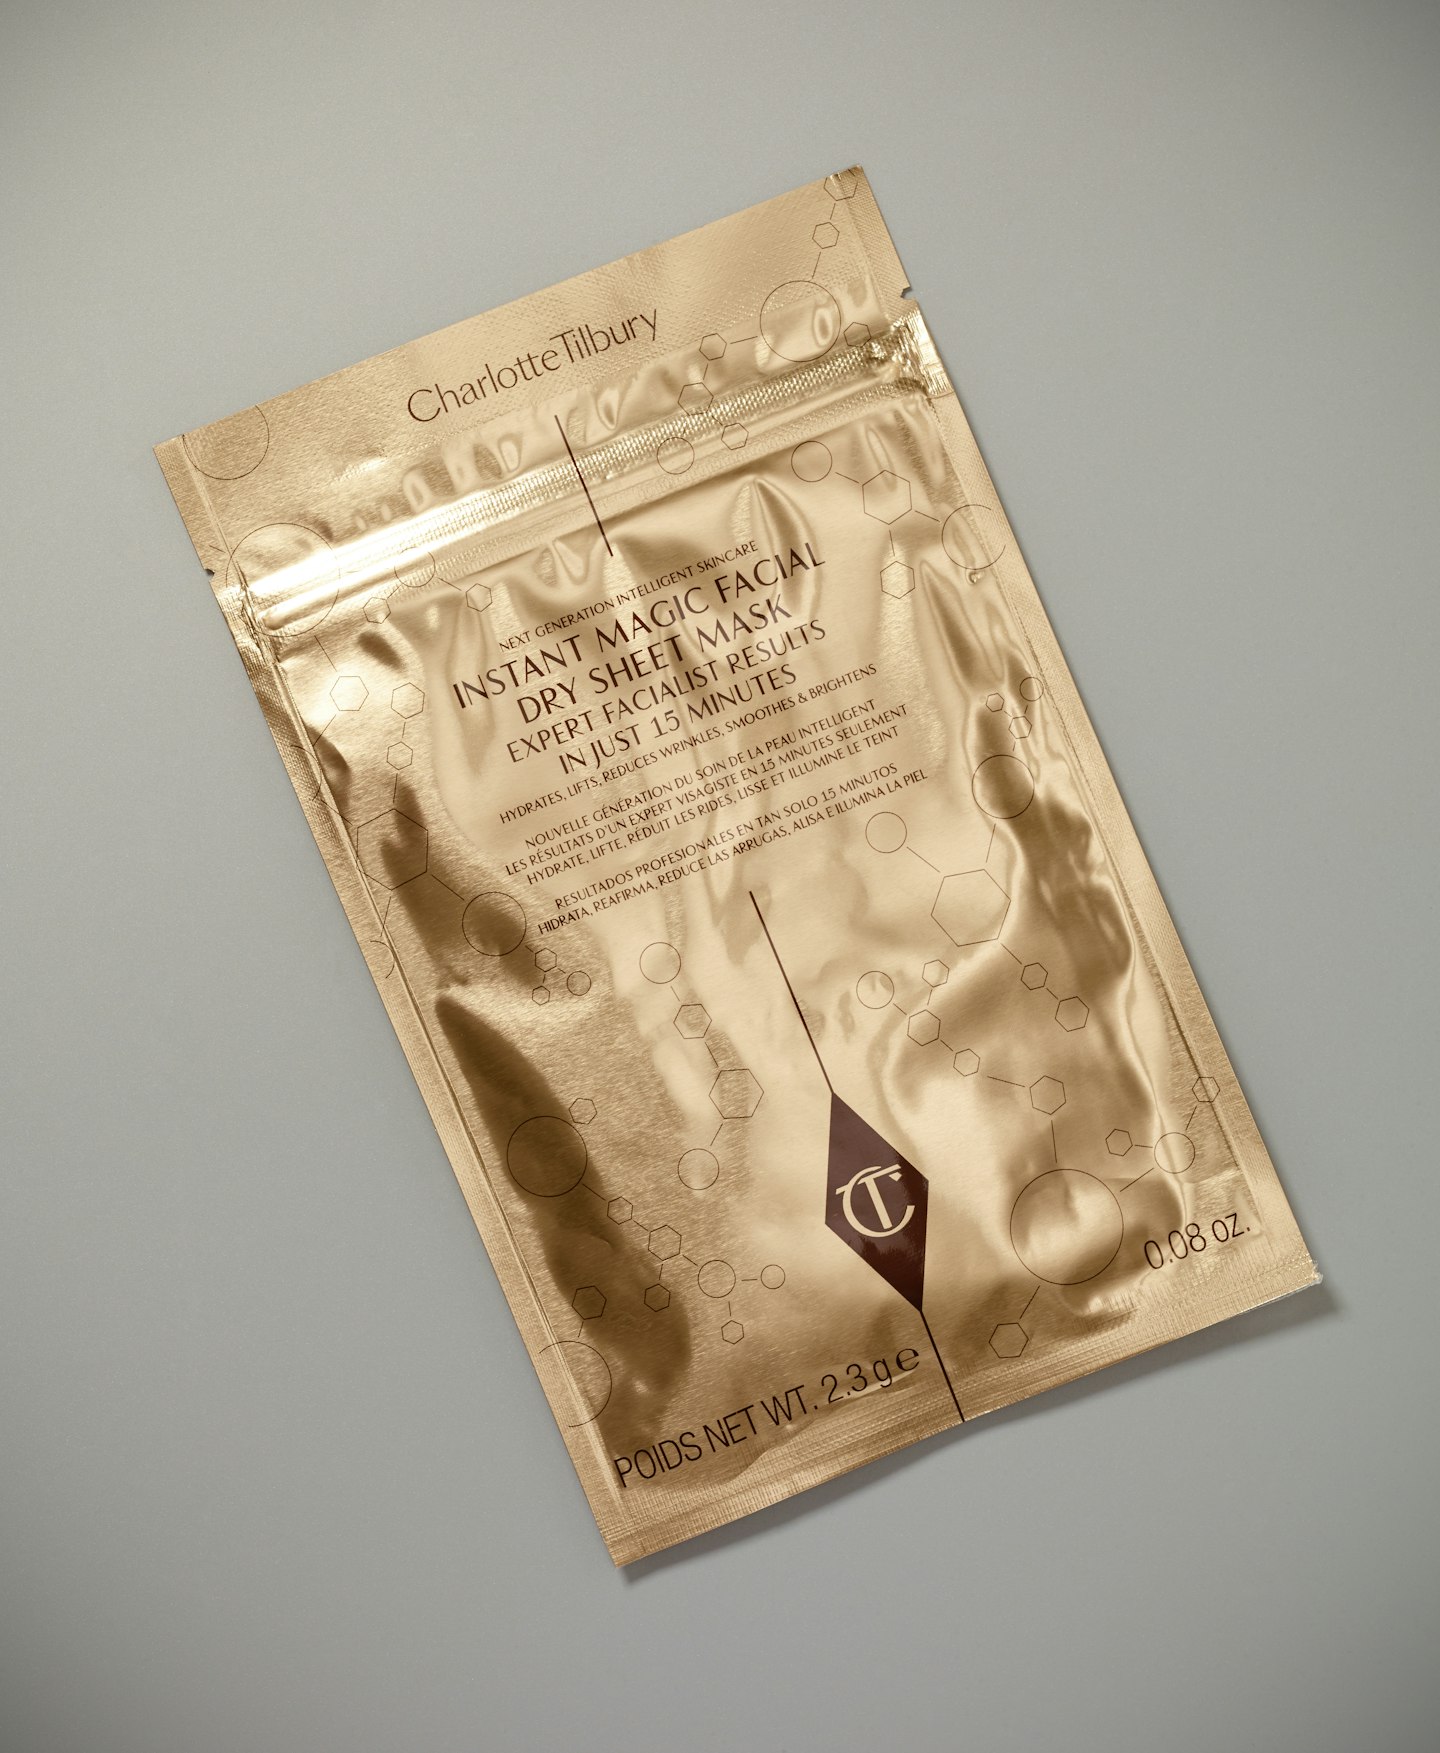 Most Exciting Skin Tech: Charlotte Tilbury instant Magic facial dry sheet mask, £18